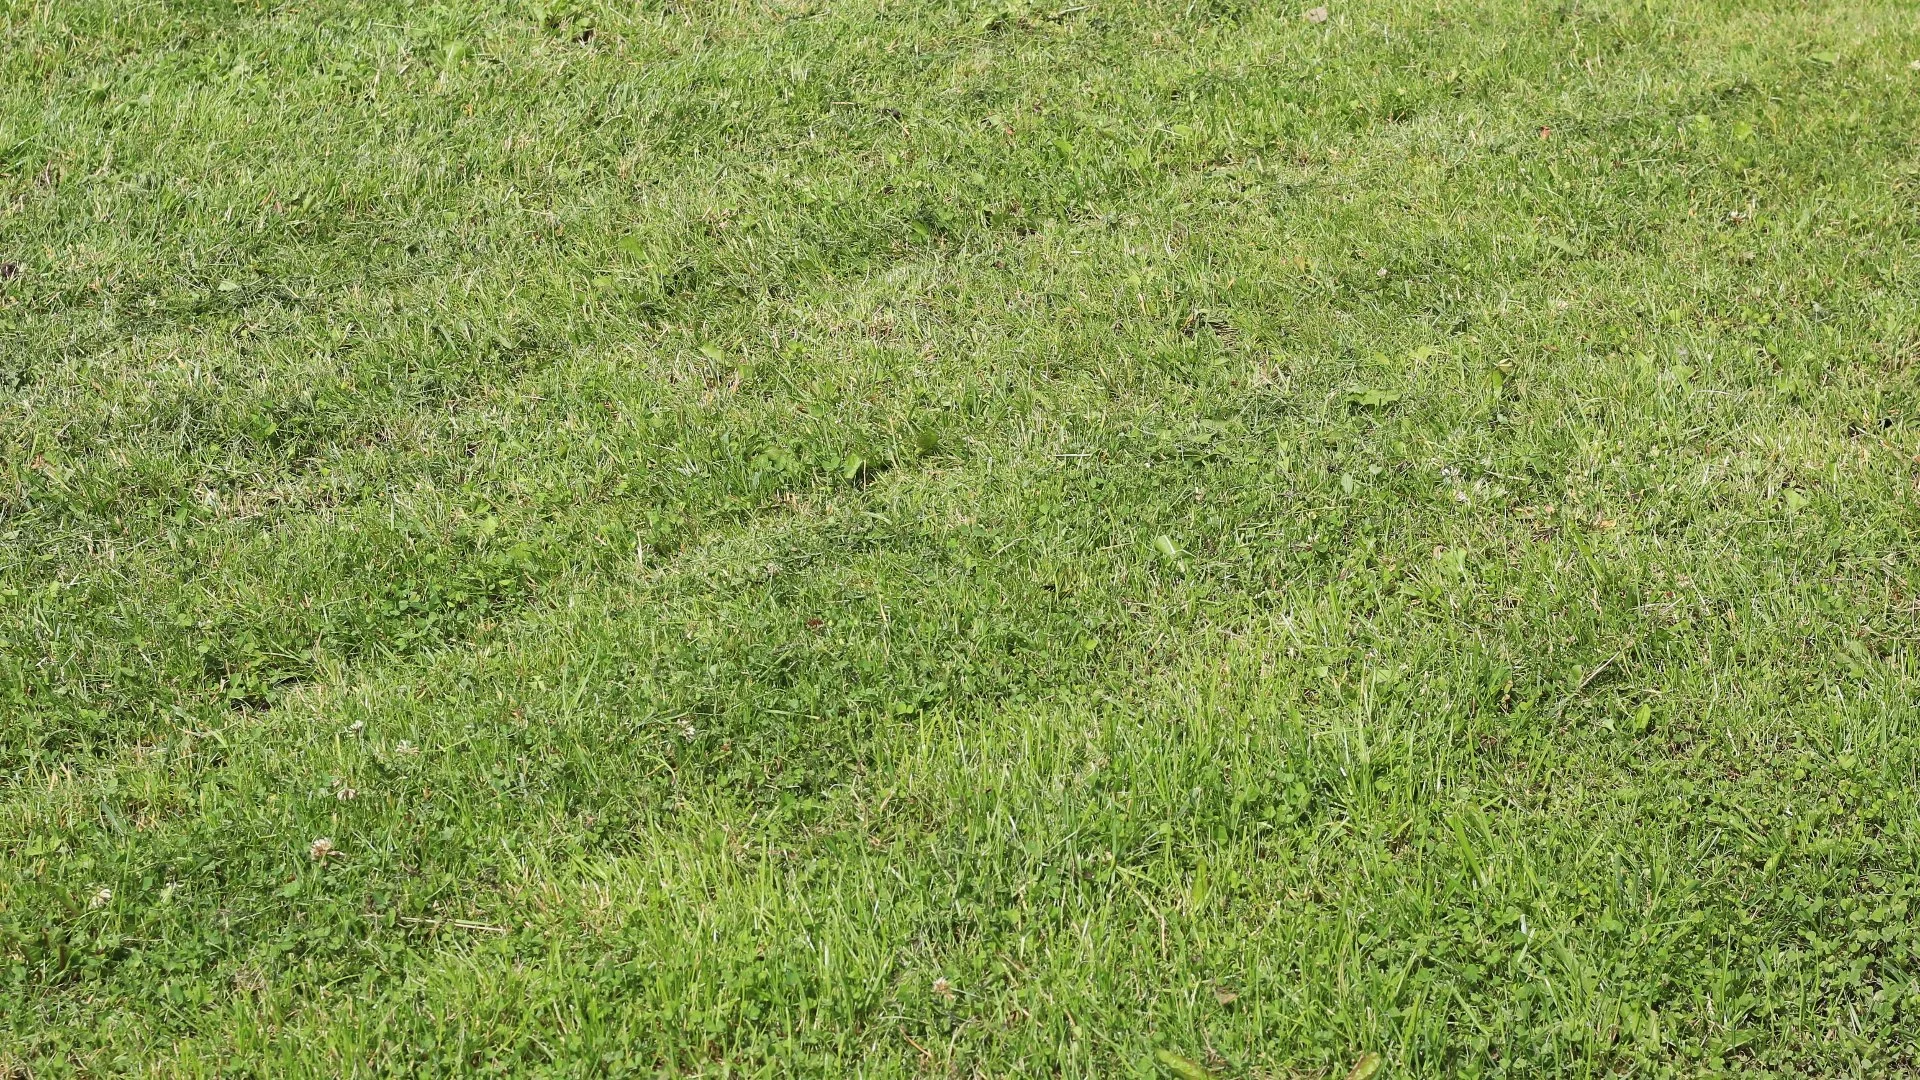 Are There Ruts in Your Soil After You Mow? You’re Probably Making This Mistake